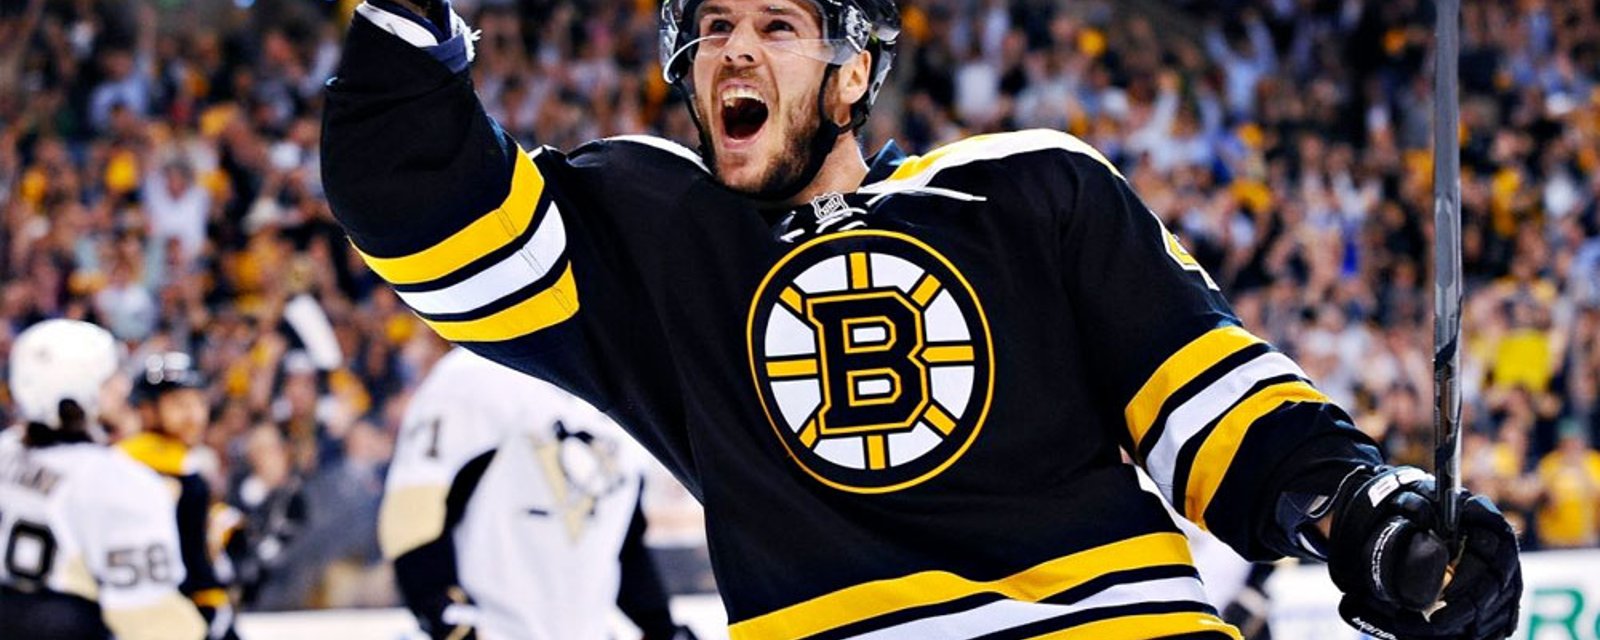 Bruins officially place Krejci on IR, shuffle lineup ahead of rivalry game against the Leafs